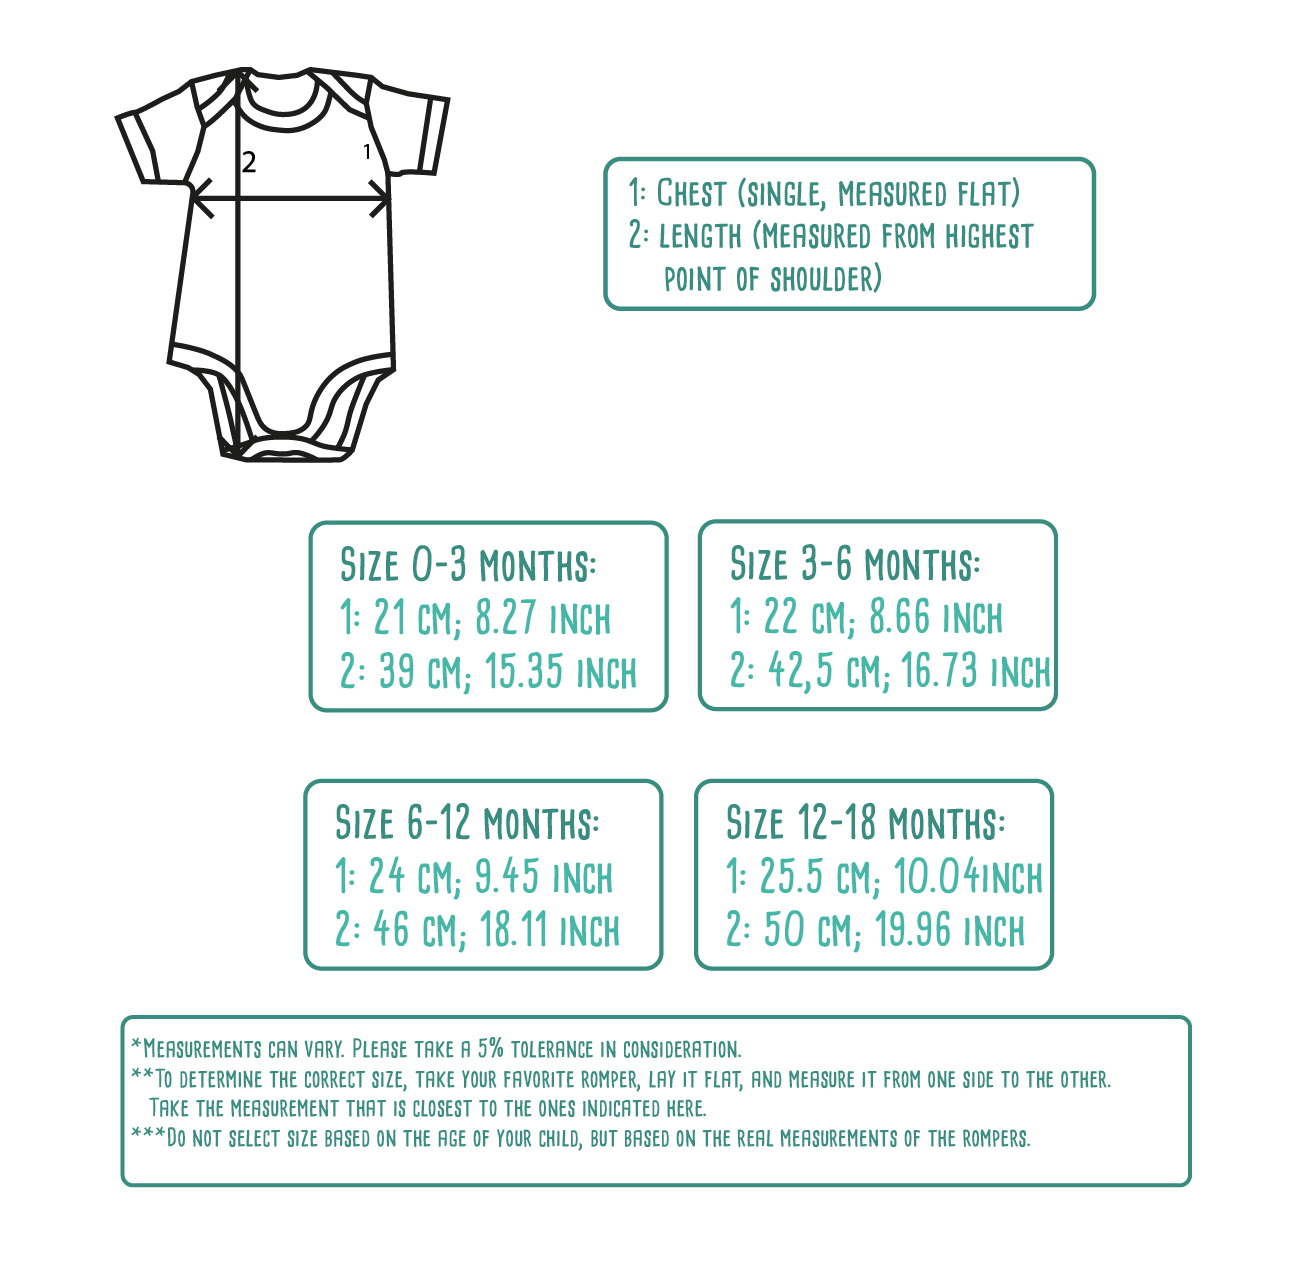 'Just being awesome' baby shortsleeve bodysuit